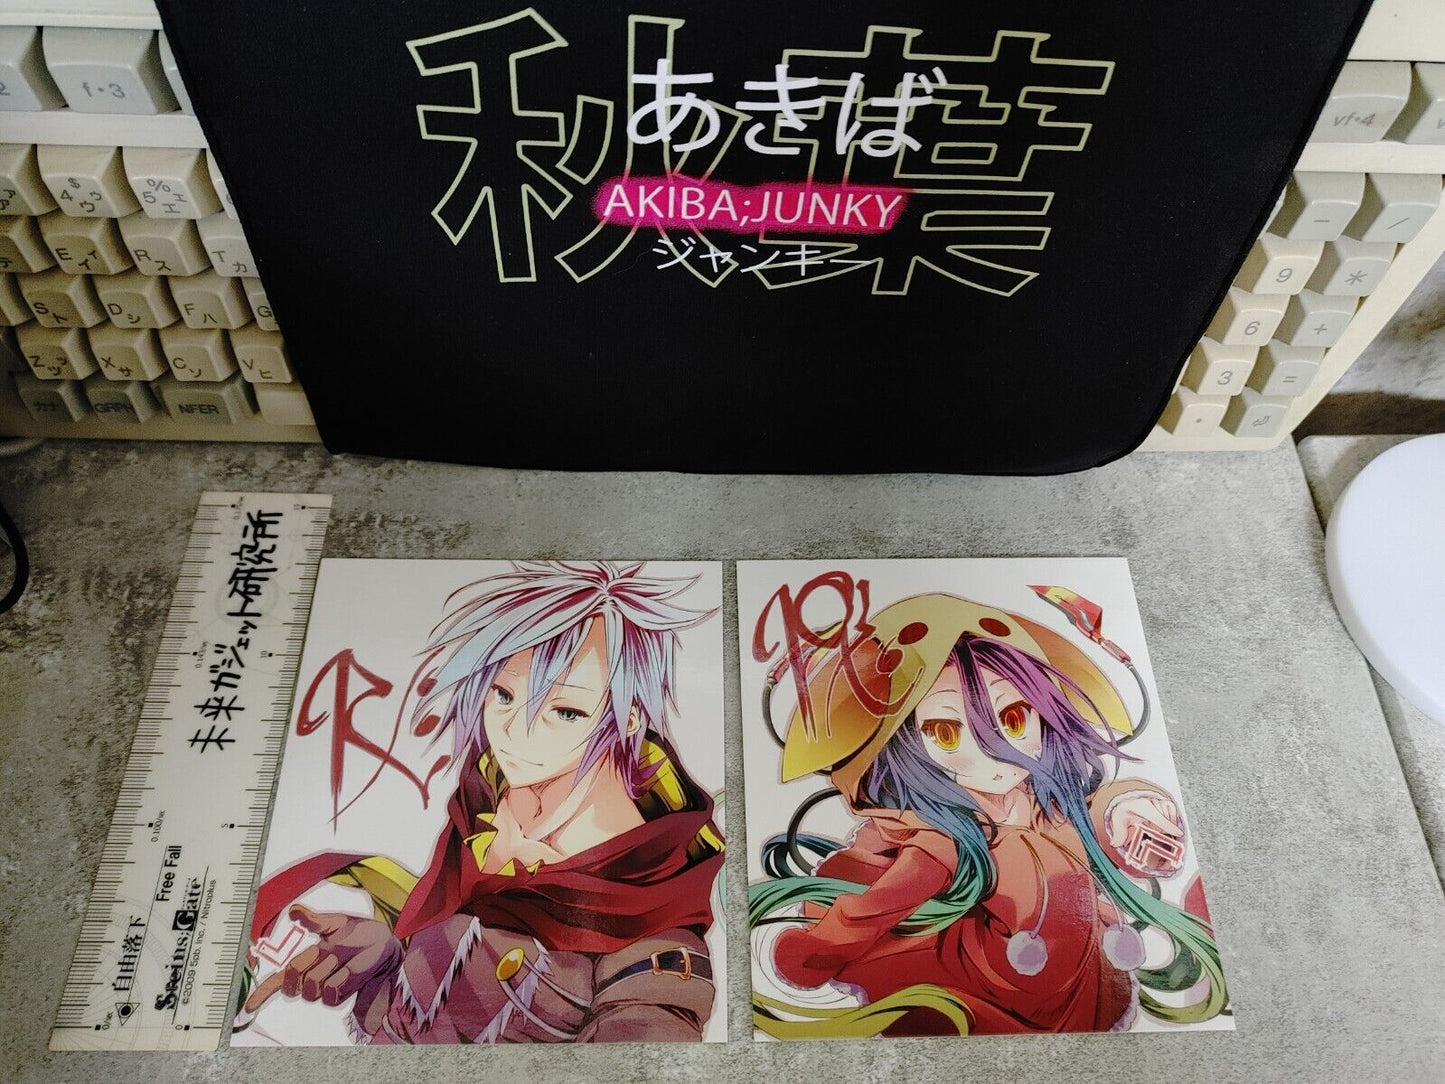 Digimon No Game No Life Anime Art Boards Promo JP Limited set